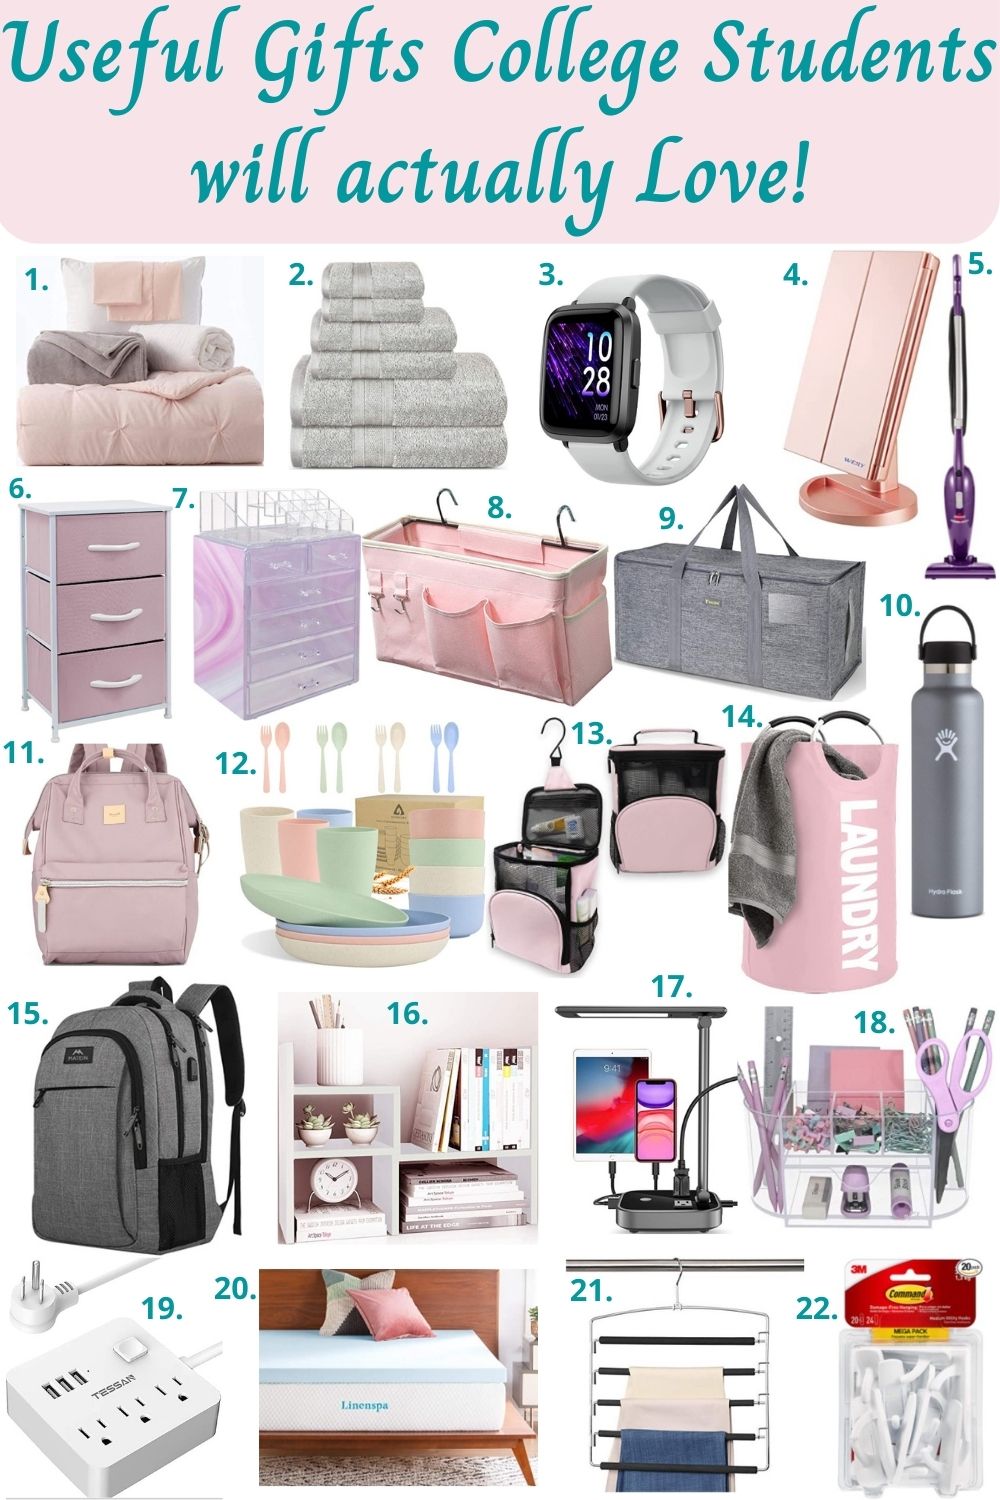 best dorm gifts for college students #dormessentials #giftideas #giftguide #giftsforstudents #collegestudents